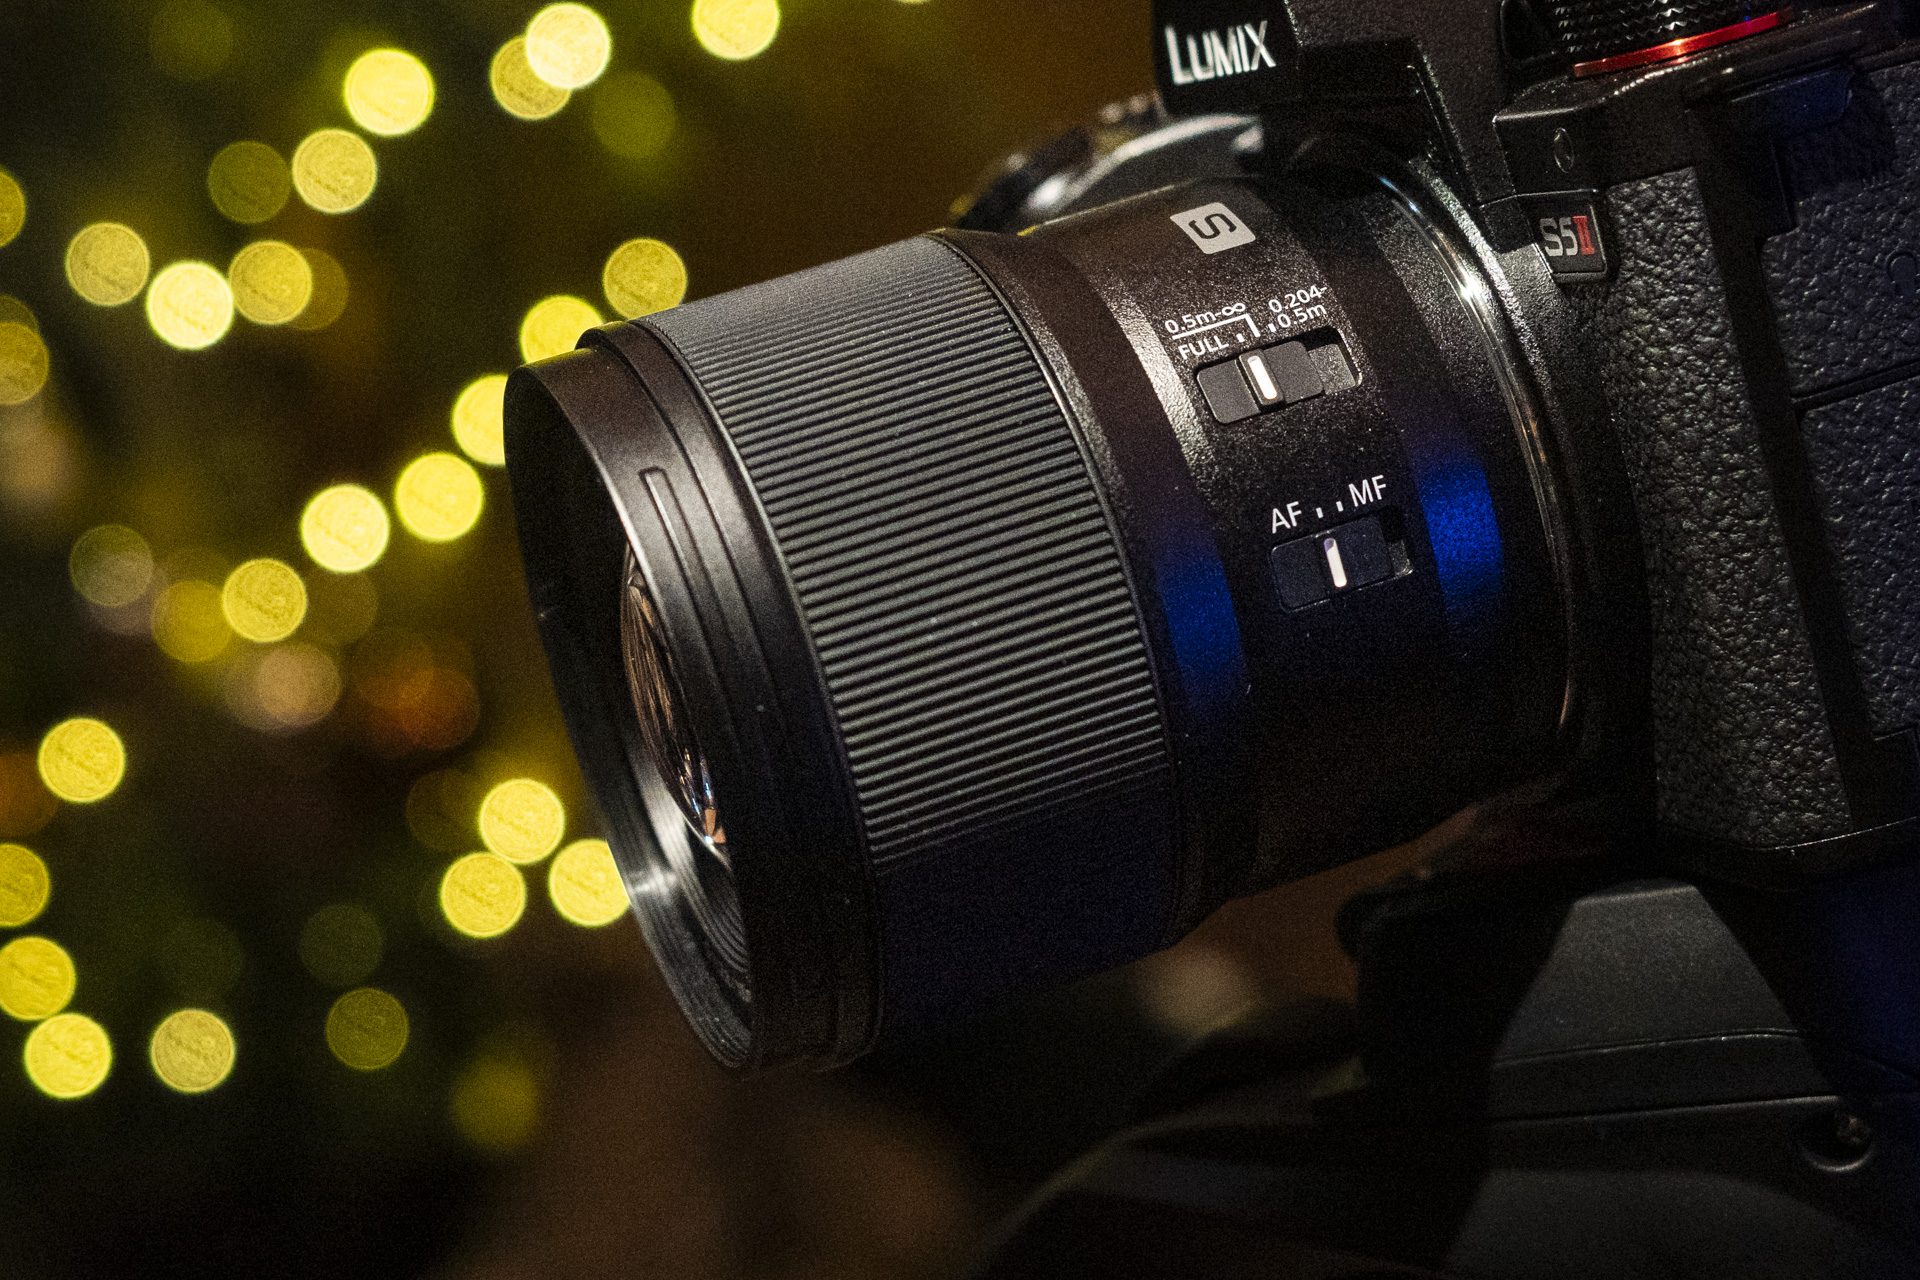 Panasonic Lumix S 100mm F2.8 Macro lens attached to a Lumix S5 II with Christmas light background